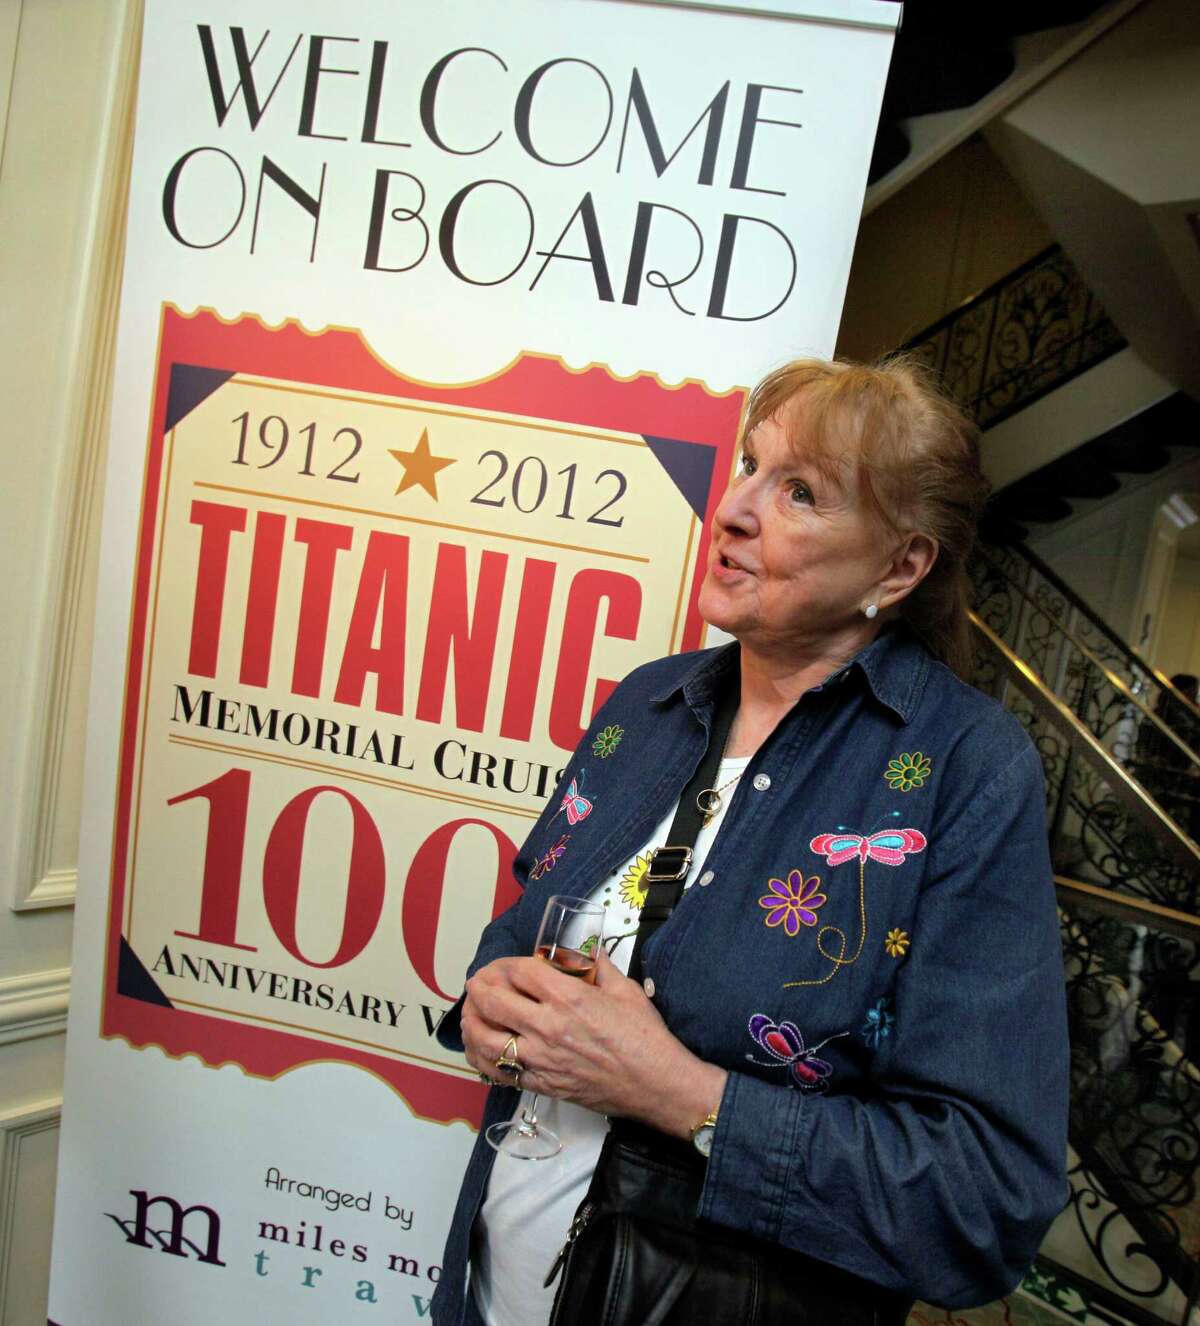 Sharon Lee Willing, from Tucson, Ariz., the great-granddaughter of Titanic passengers Herbert and Carrie Chaffee, boards the Azamara Journey, bound for for Halifax, Nova Scotia, for the Titanic Memorial Cruise, in New York, Tuesday, April 10, 2012. Passengers will visit a cemetery where 150 victims of the Titanic are buried. The ship will also feature lectures about life on board the doomed ocean liner and hold a memorial service at sea. (AP Photo/Richard Drew)